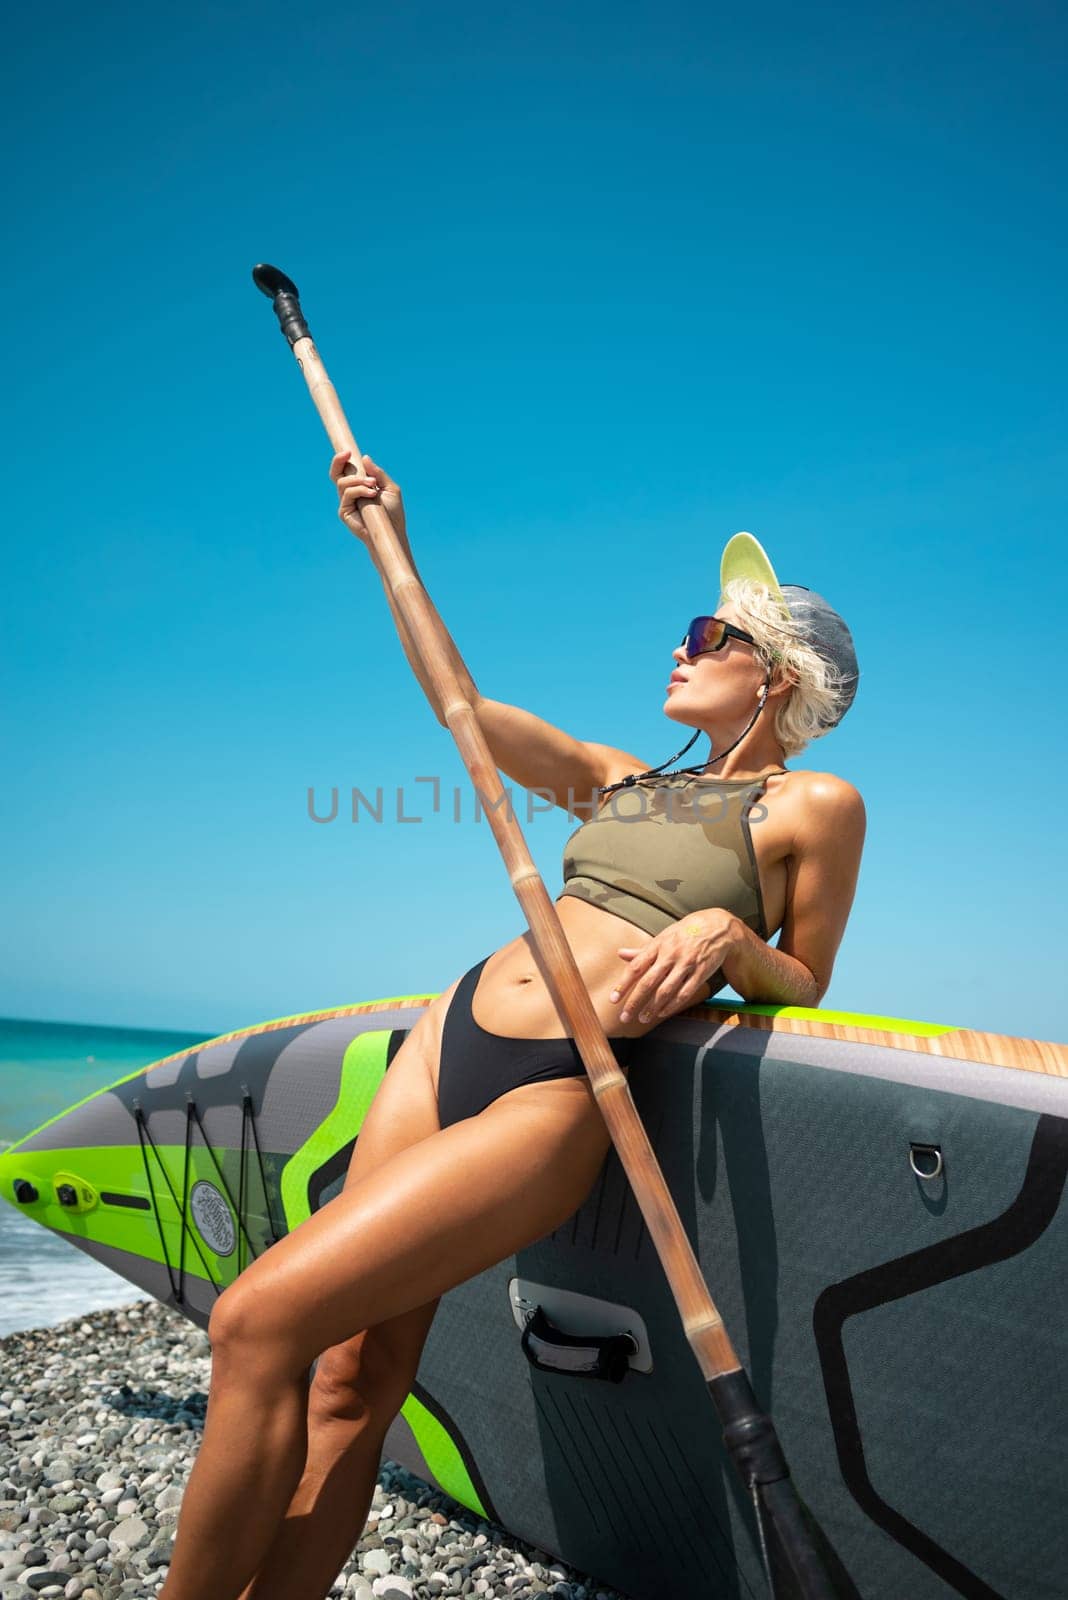 sexy young surfer girl in a swimsuit on a sup board with a bamboo paddle by the sea in stylish sunglasses and a baseball cap